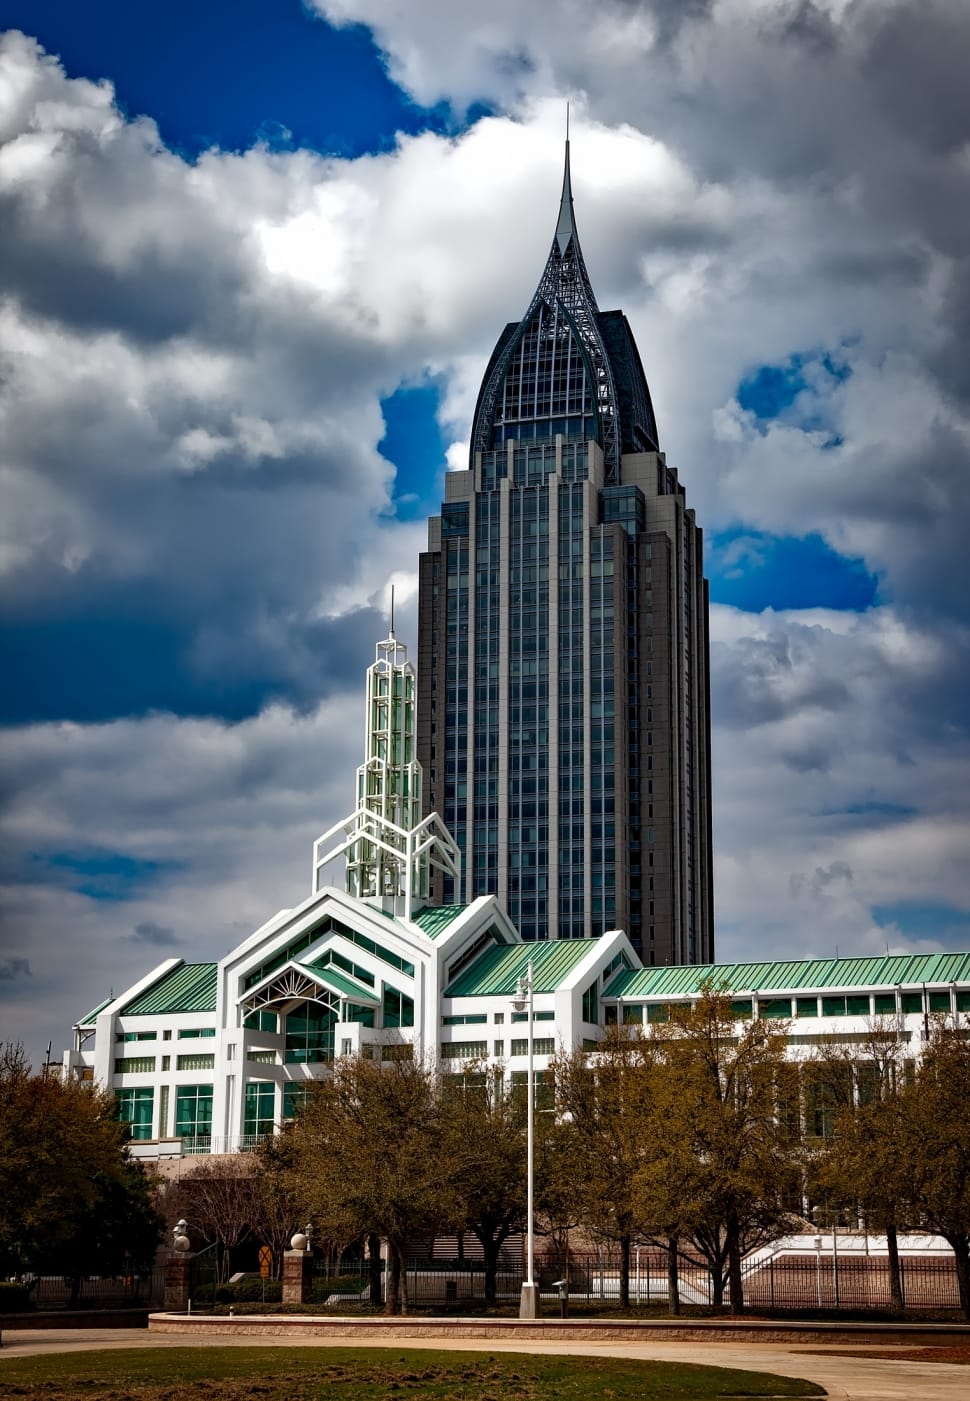 Mobile, Urban, Cities, Alabama, City, cloud - sky, architecture preview